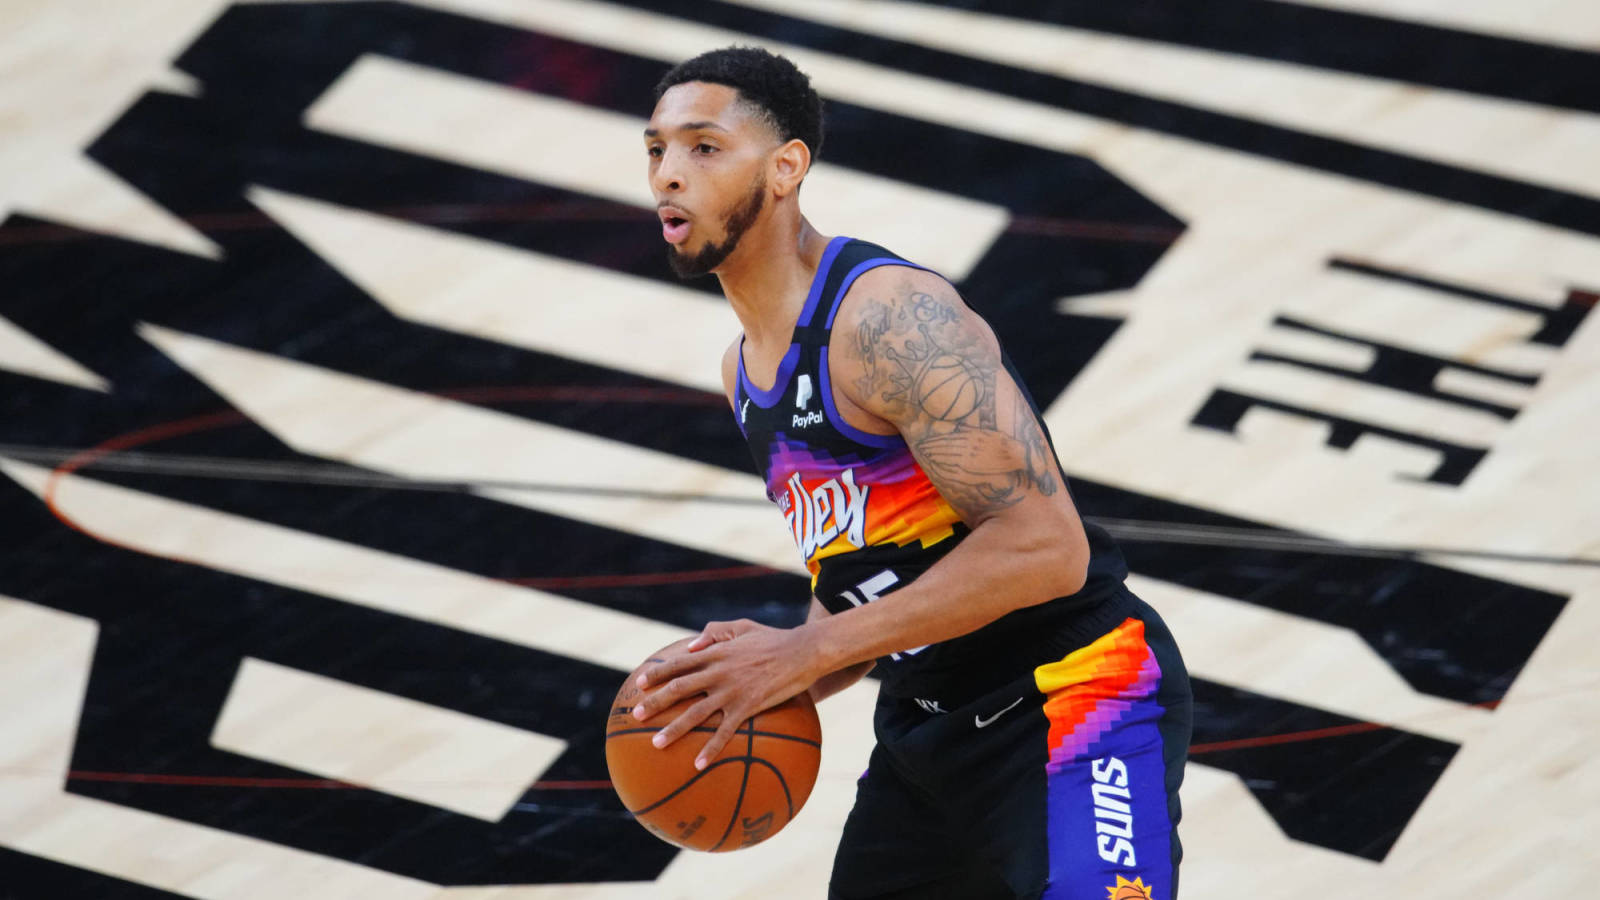 Suns' Cameron Payne suffers ankle injury in Game 3 against Clippers